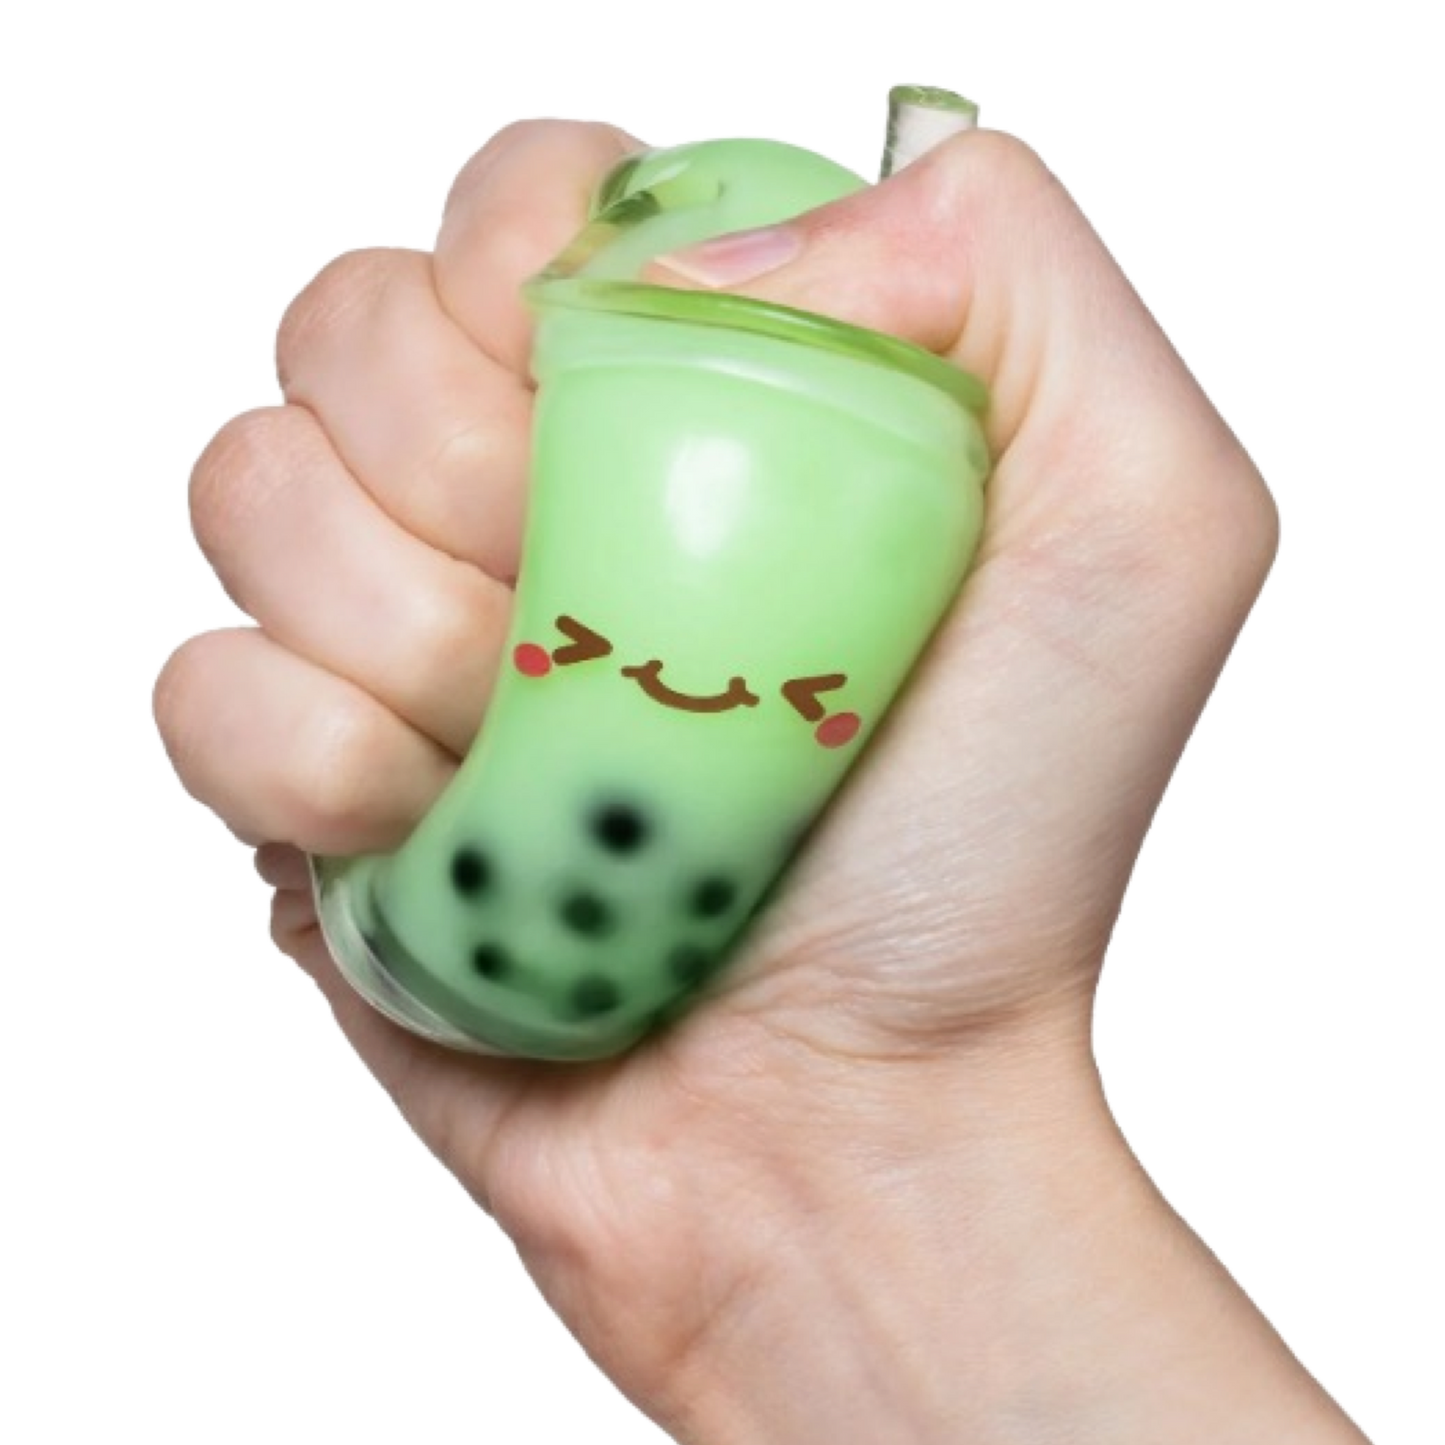 Milk Tea Tapioca Boba Cup squishy Stress Reliever Toy - 5 inch in Height